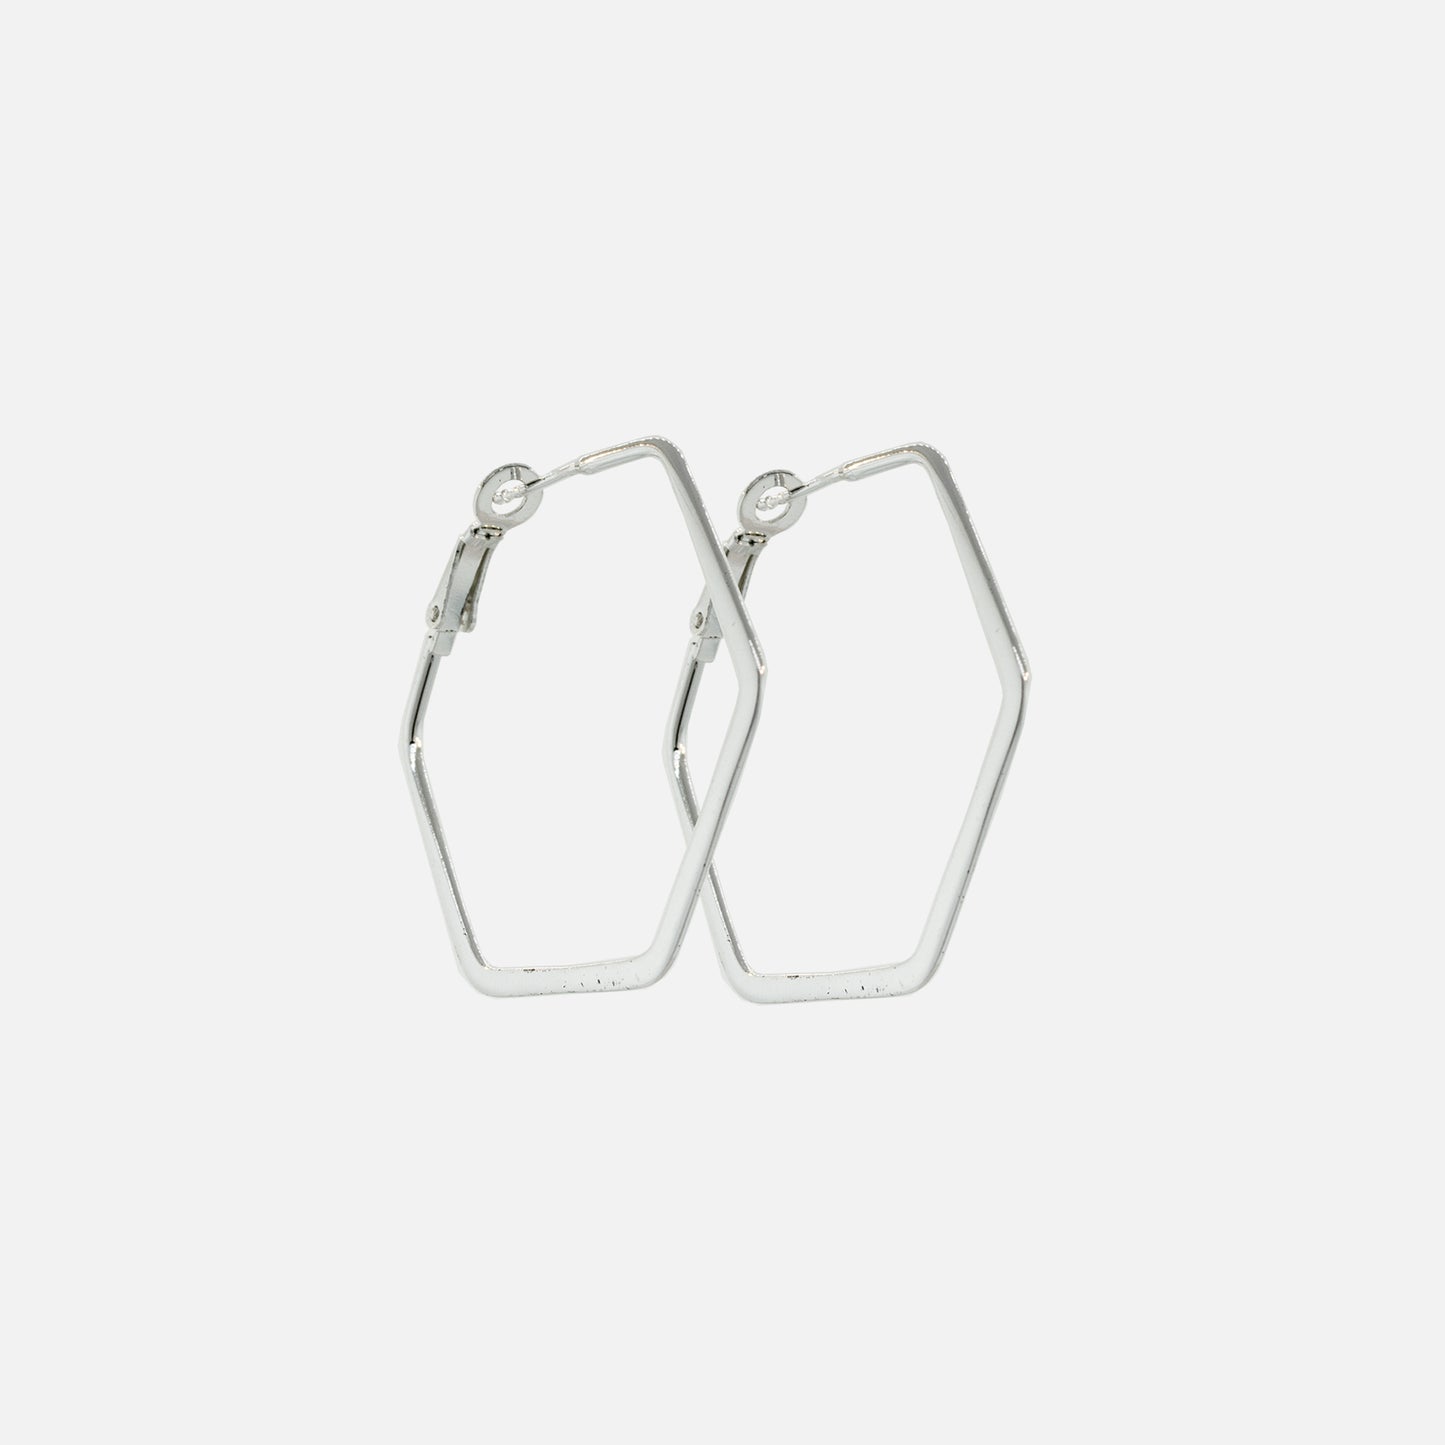 A pair of Super Silver Flat Hexagon Hinged Hoops on a white background.